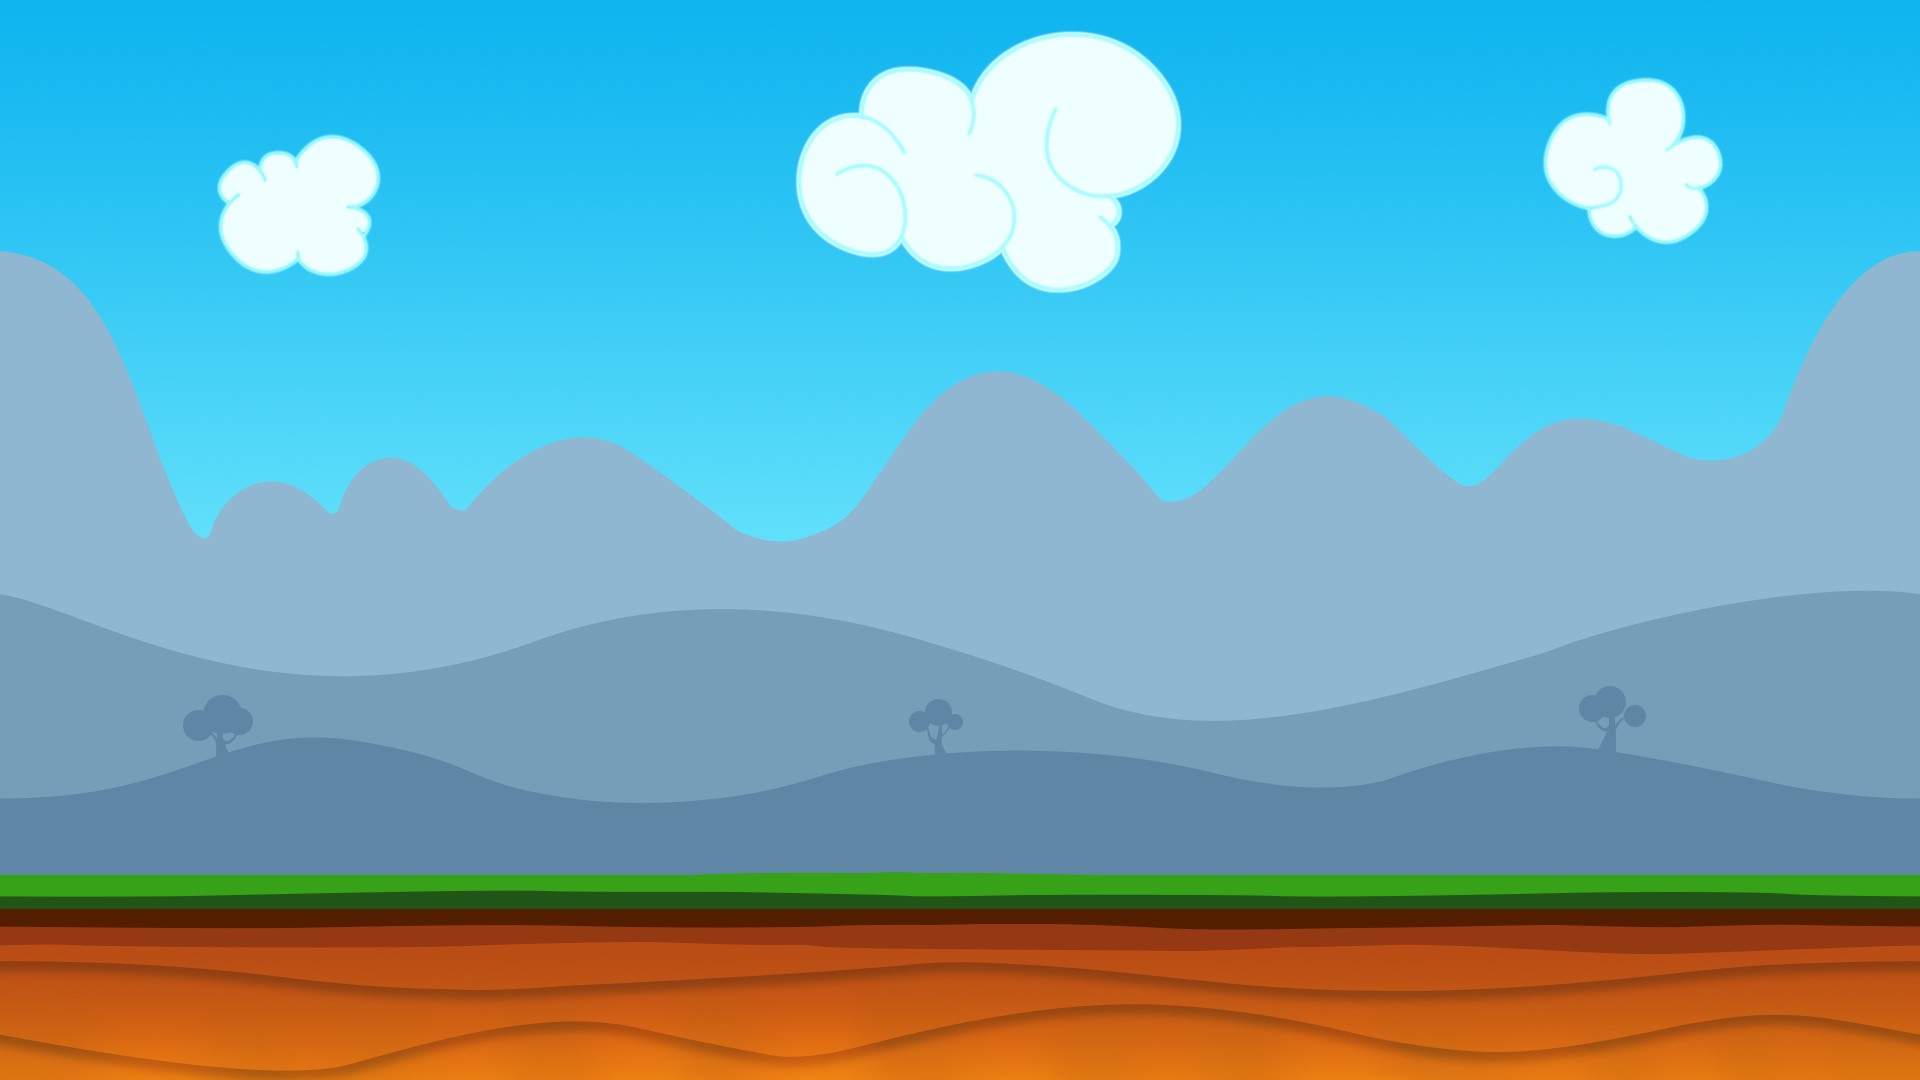 Tapster, Android Marshmallow, Androids, Landscape, Vector Wallpaper